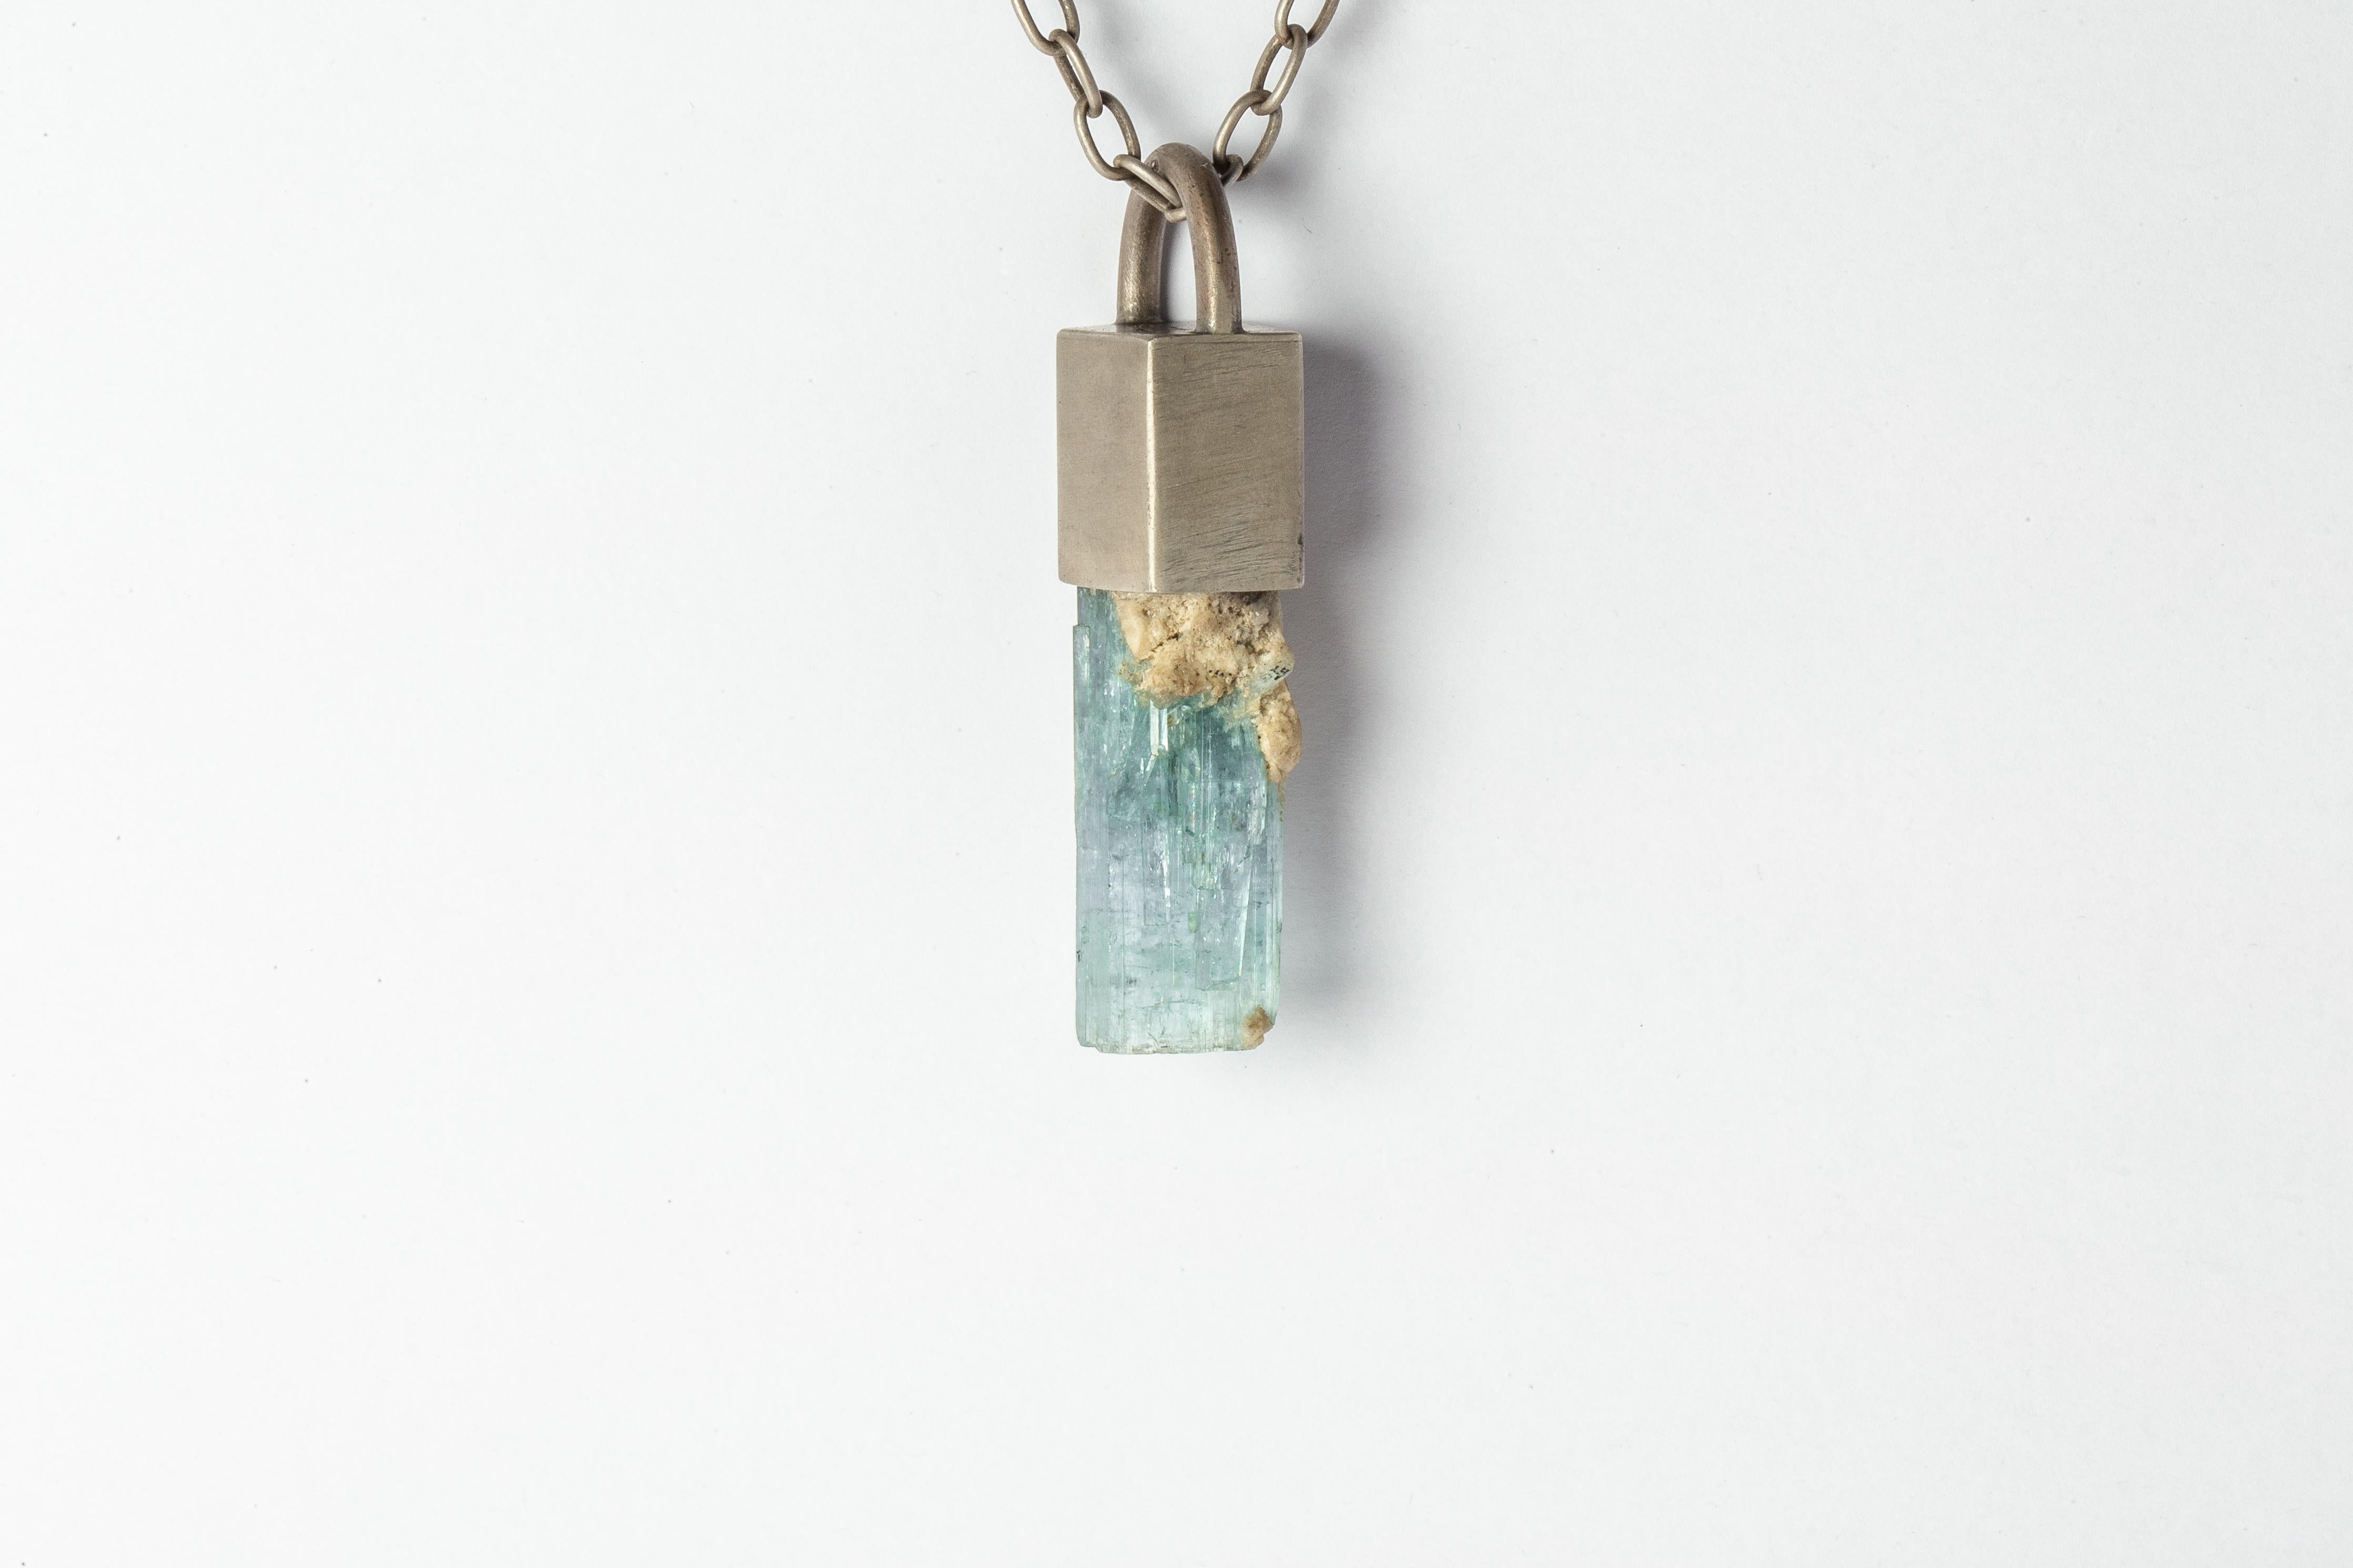 Necklace in sterling silver and rough of aquamarine. The Talisman series is an exploration into the power of natural crystals. Each piece is unique and special. The title Specimen signifies a particular class of mineral that is both rare and